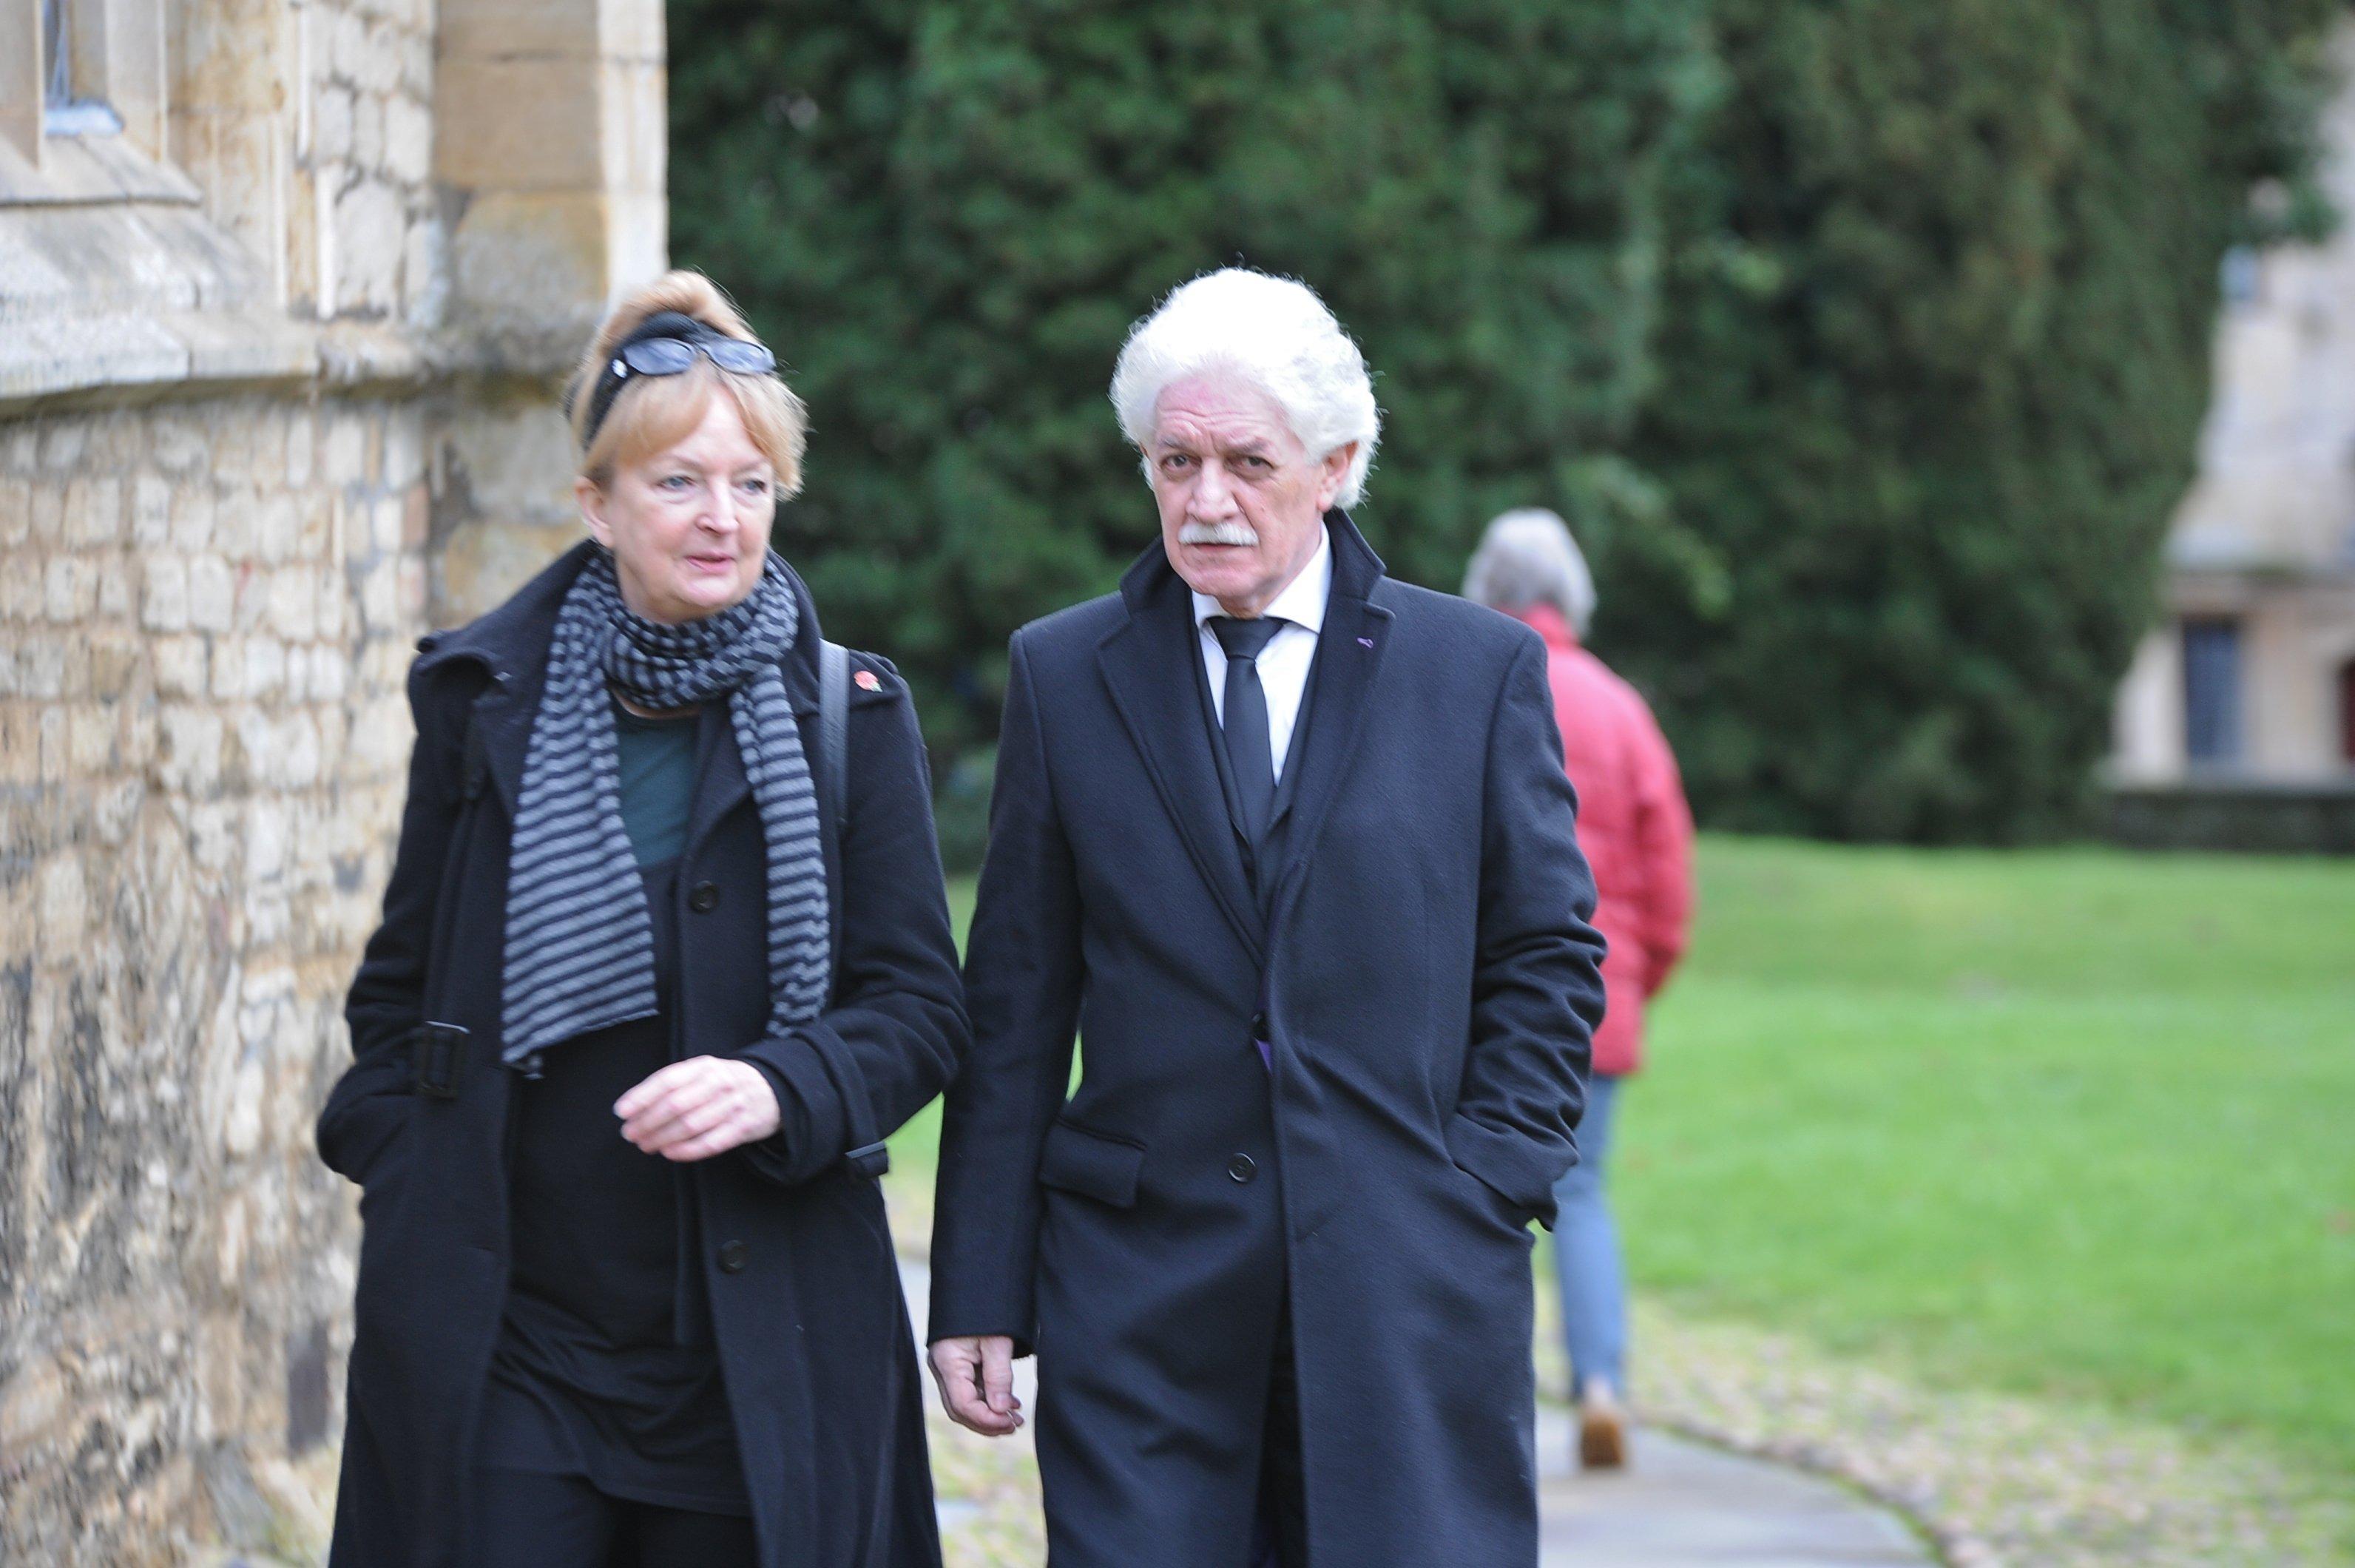 Brian Mawhinney funeral at St Peter's church, Oundle. Foprmer manager of the Bull Hotel Ash Osib EMN-191122-133912009